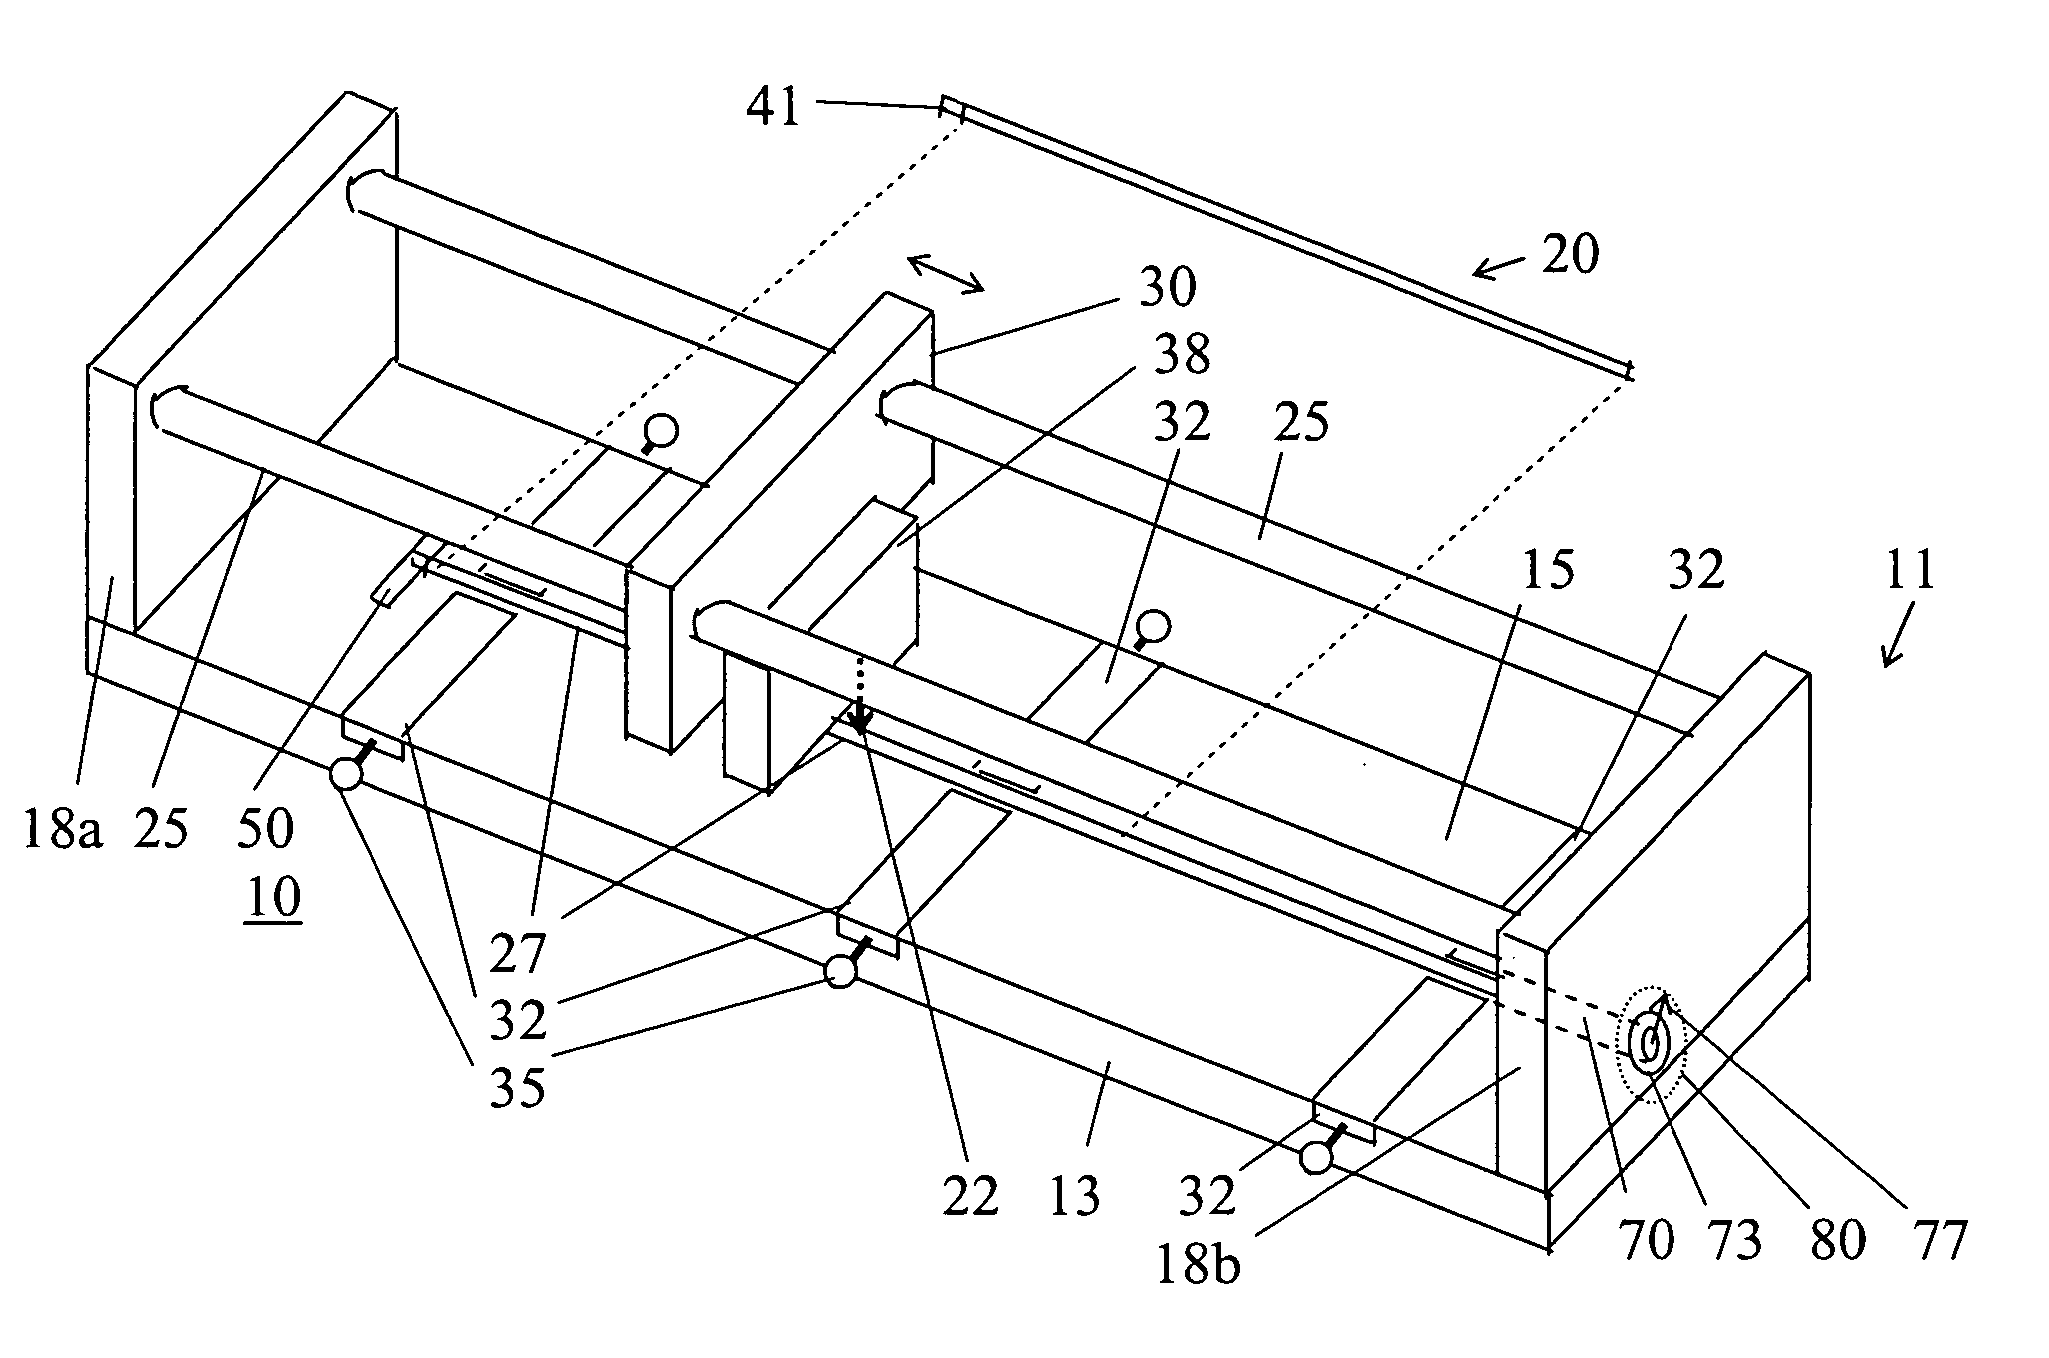 Tool and method for scribing longitudinal lines on a cylindrical rod